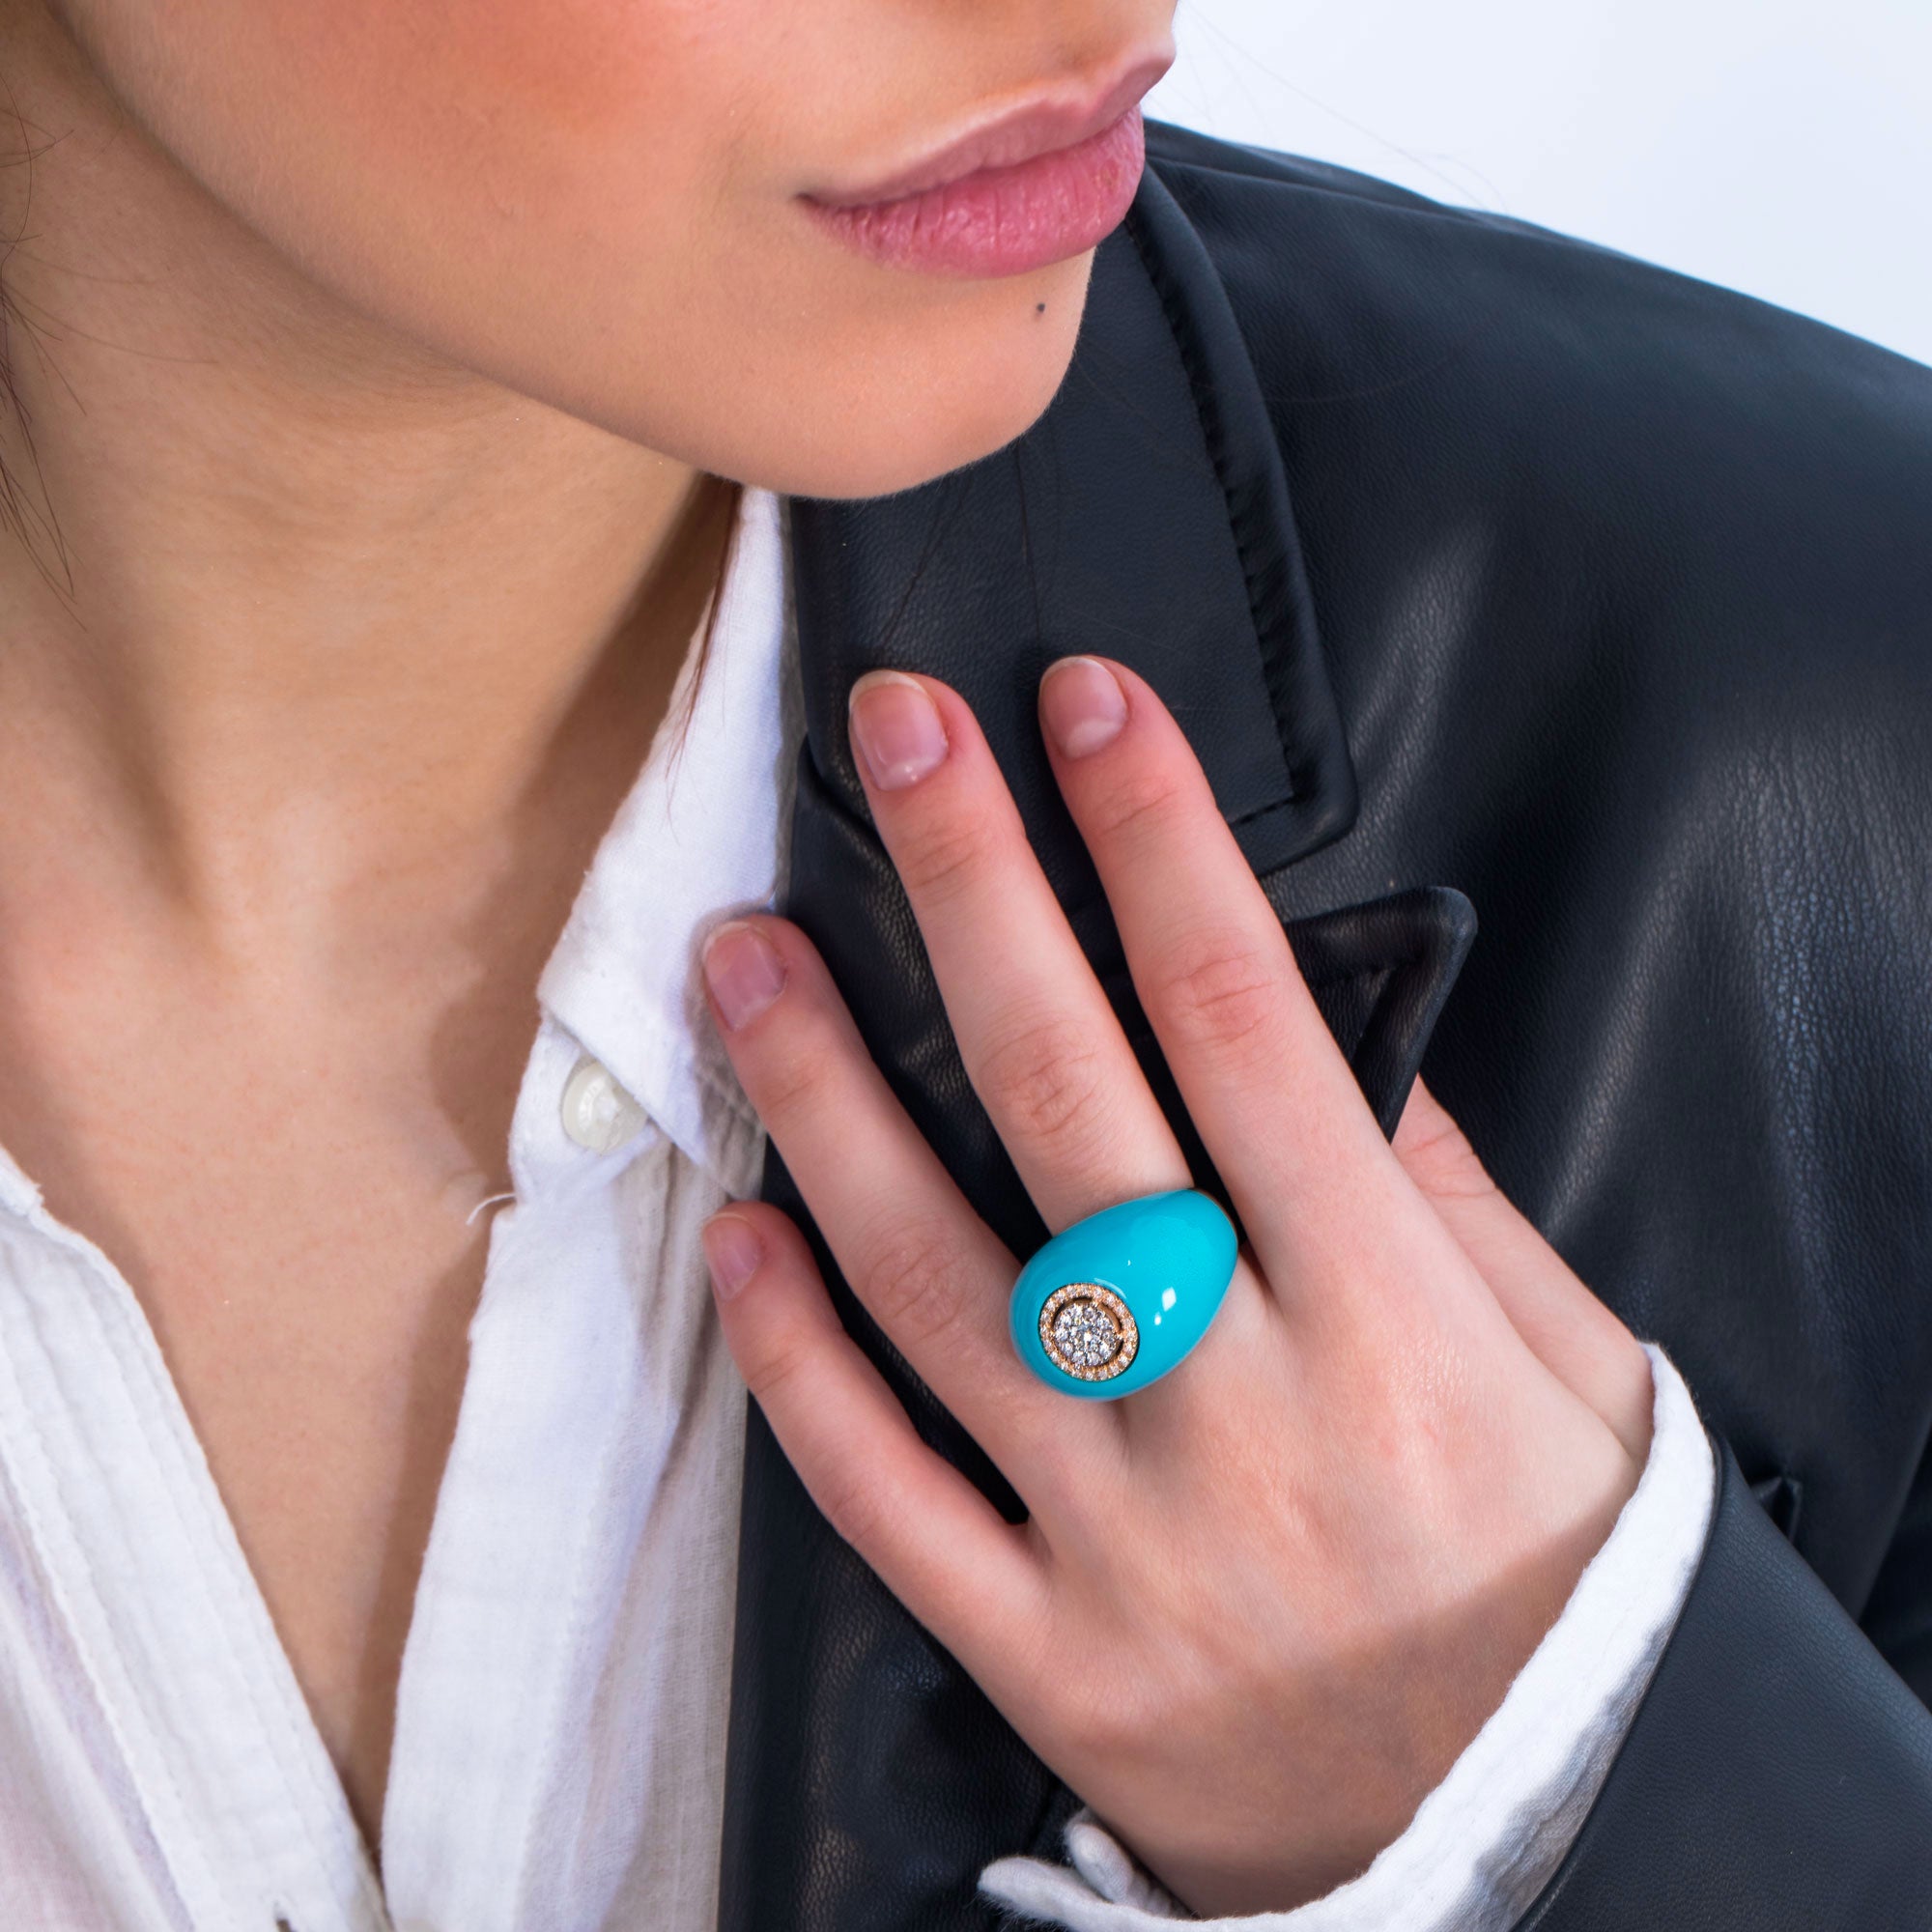 Turquoise Dome Ring